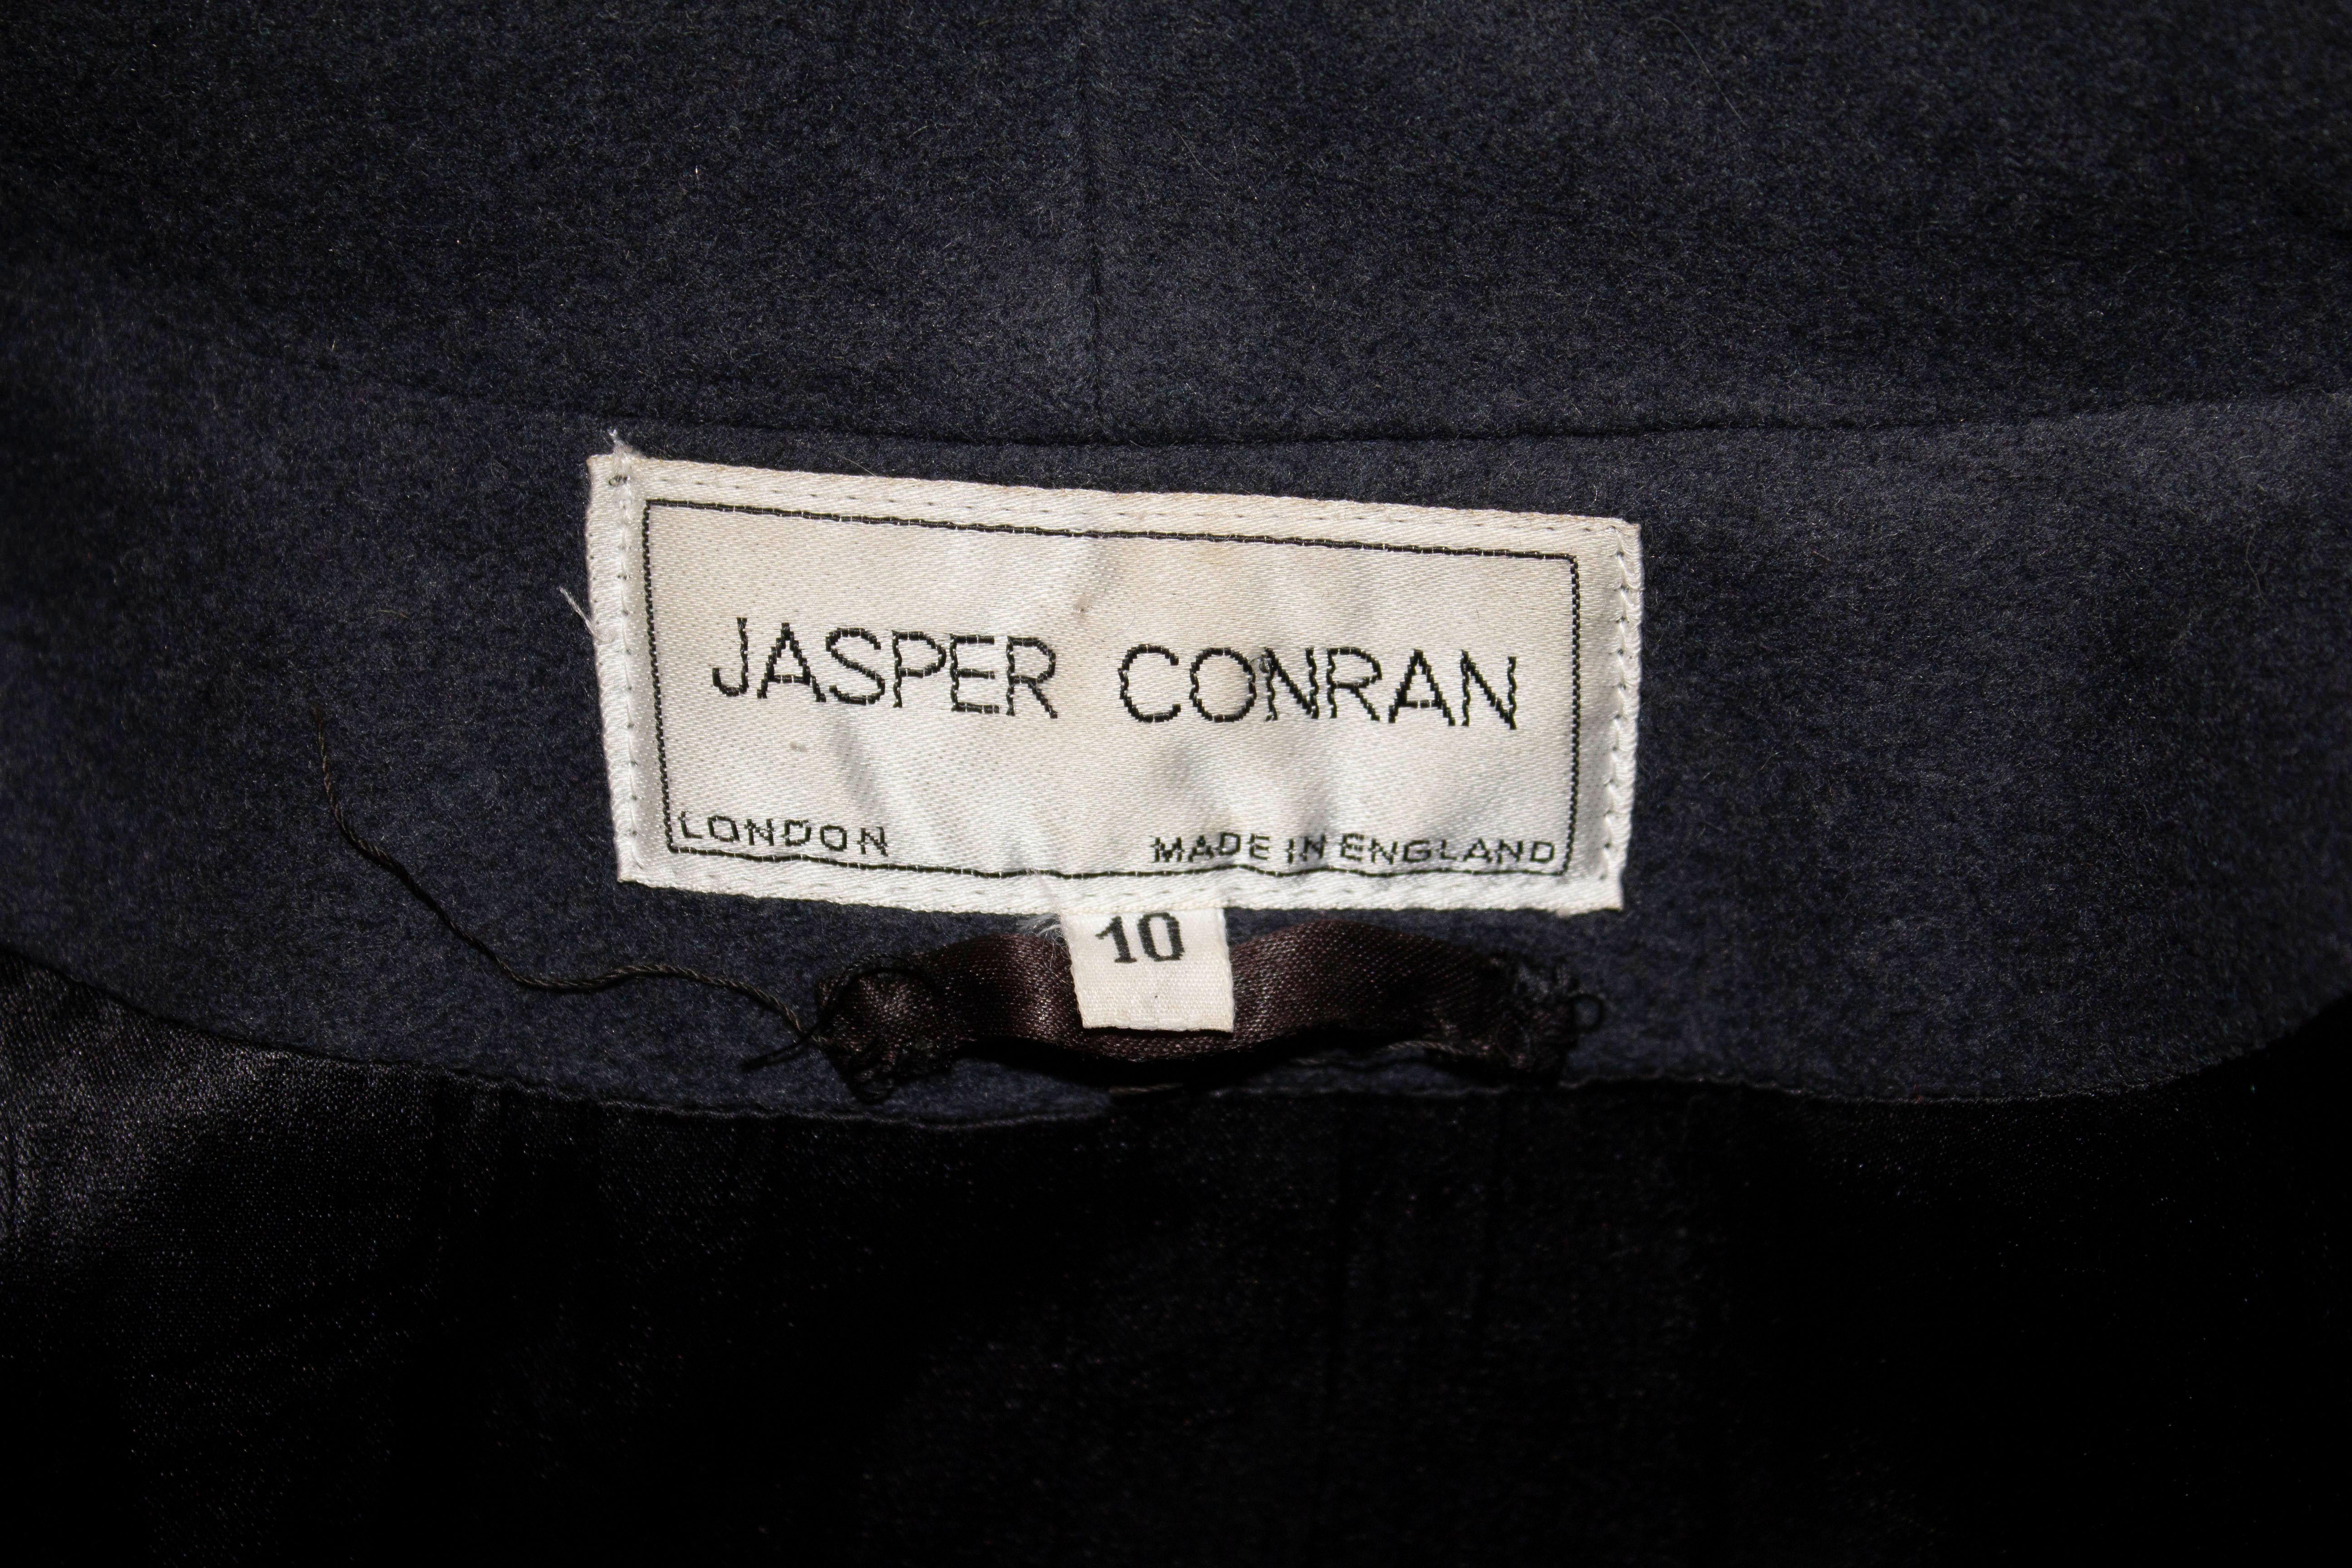 A chic grey wool coat by Jasper Conran main line. The coat has two pockets on the front and is labelled a size 10. Made in England Measurements: Bust up to 40'', length 43''